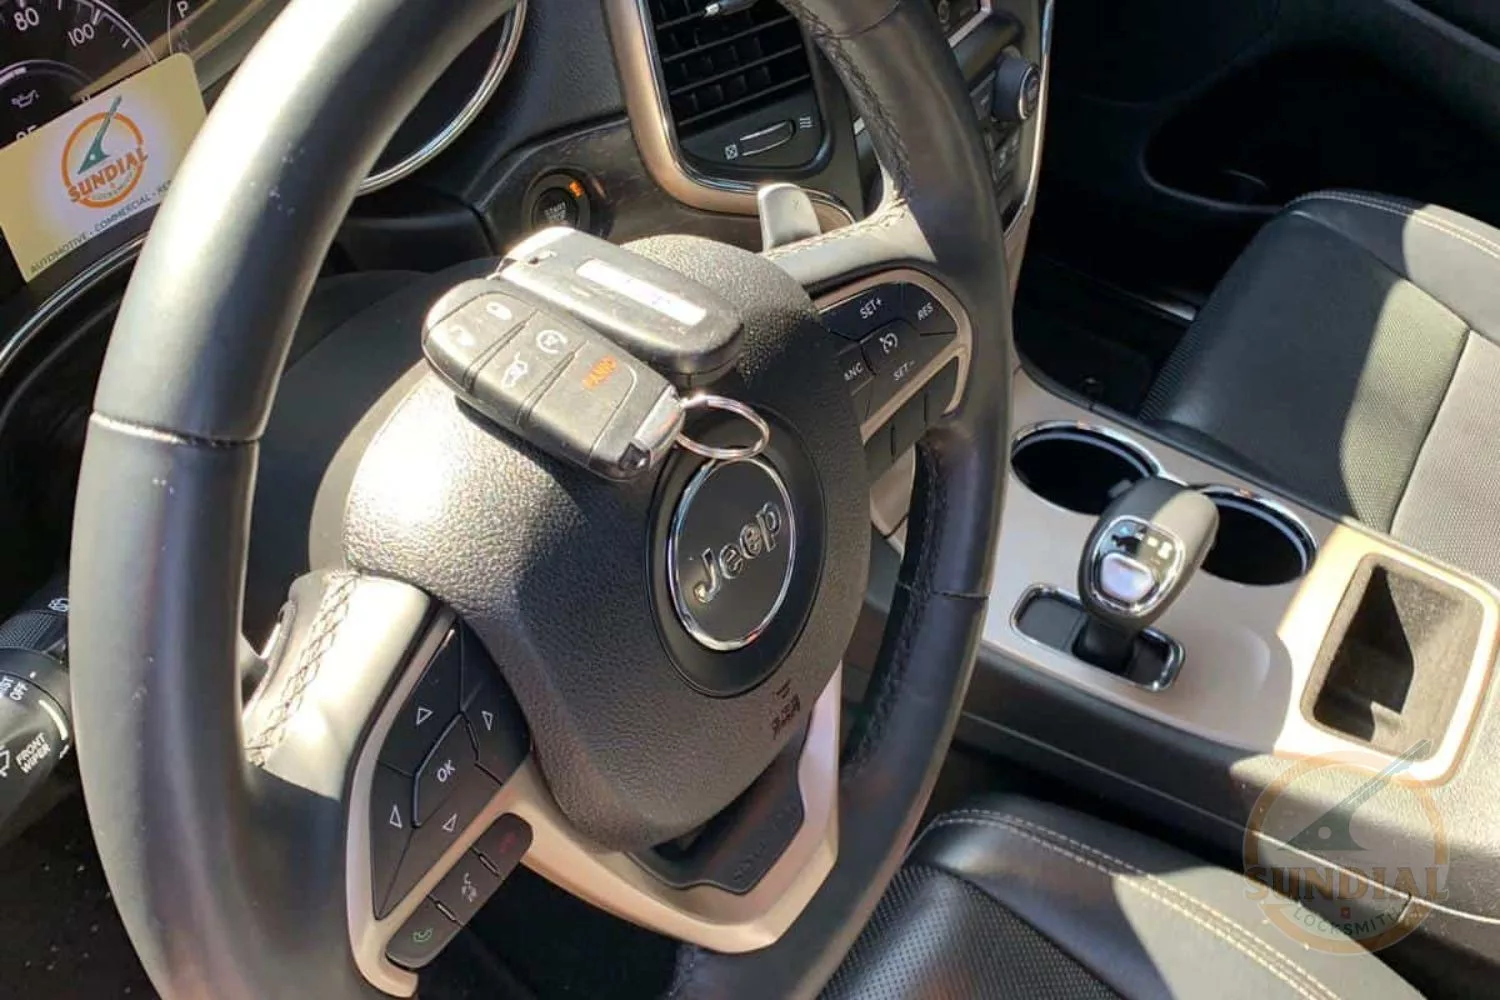 Jeep steering wheel and vehicle interior details.